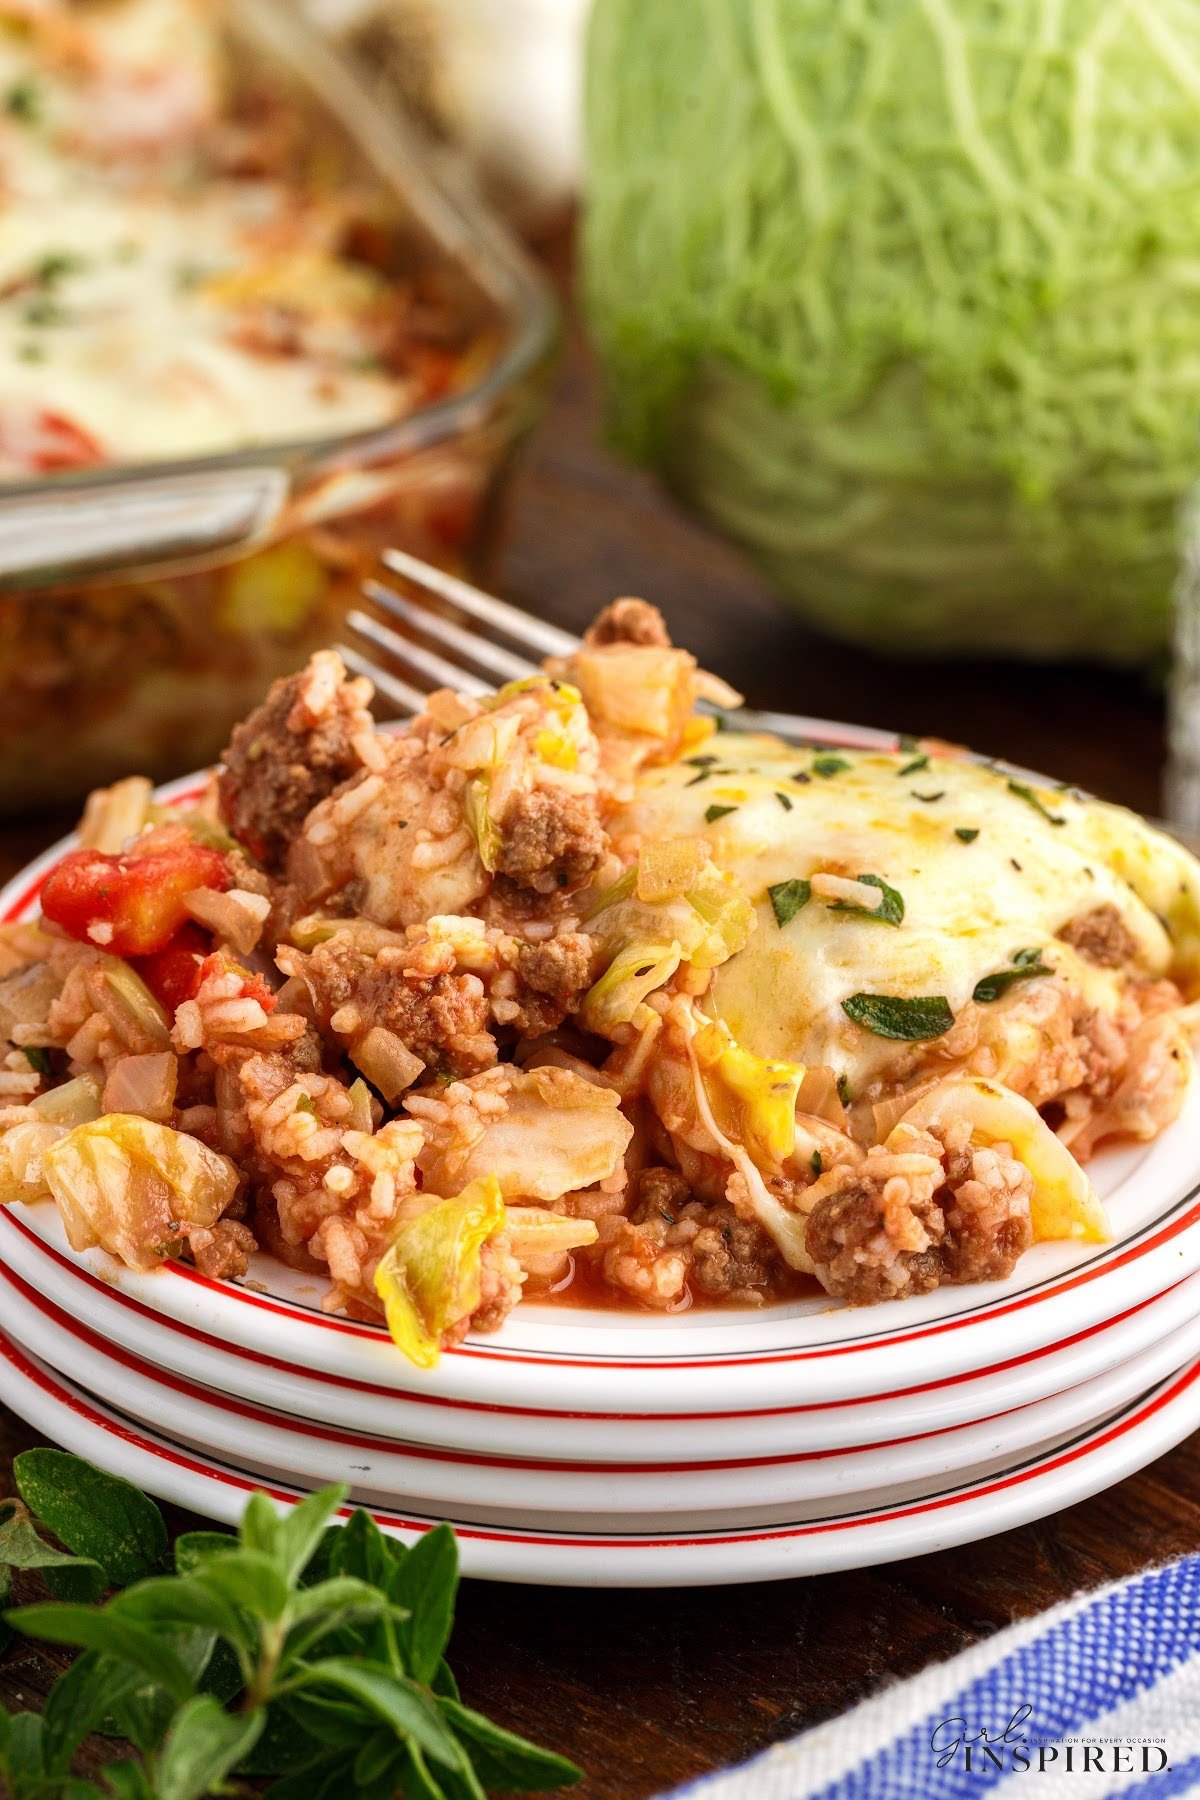 A dish of Cabbage Roll Casserole.